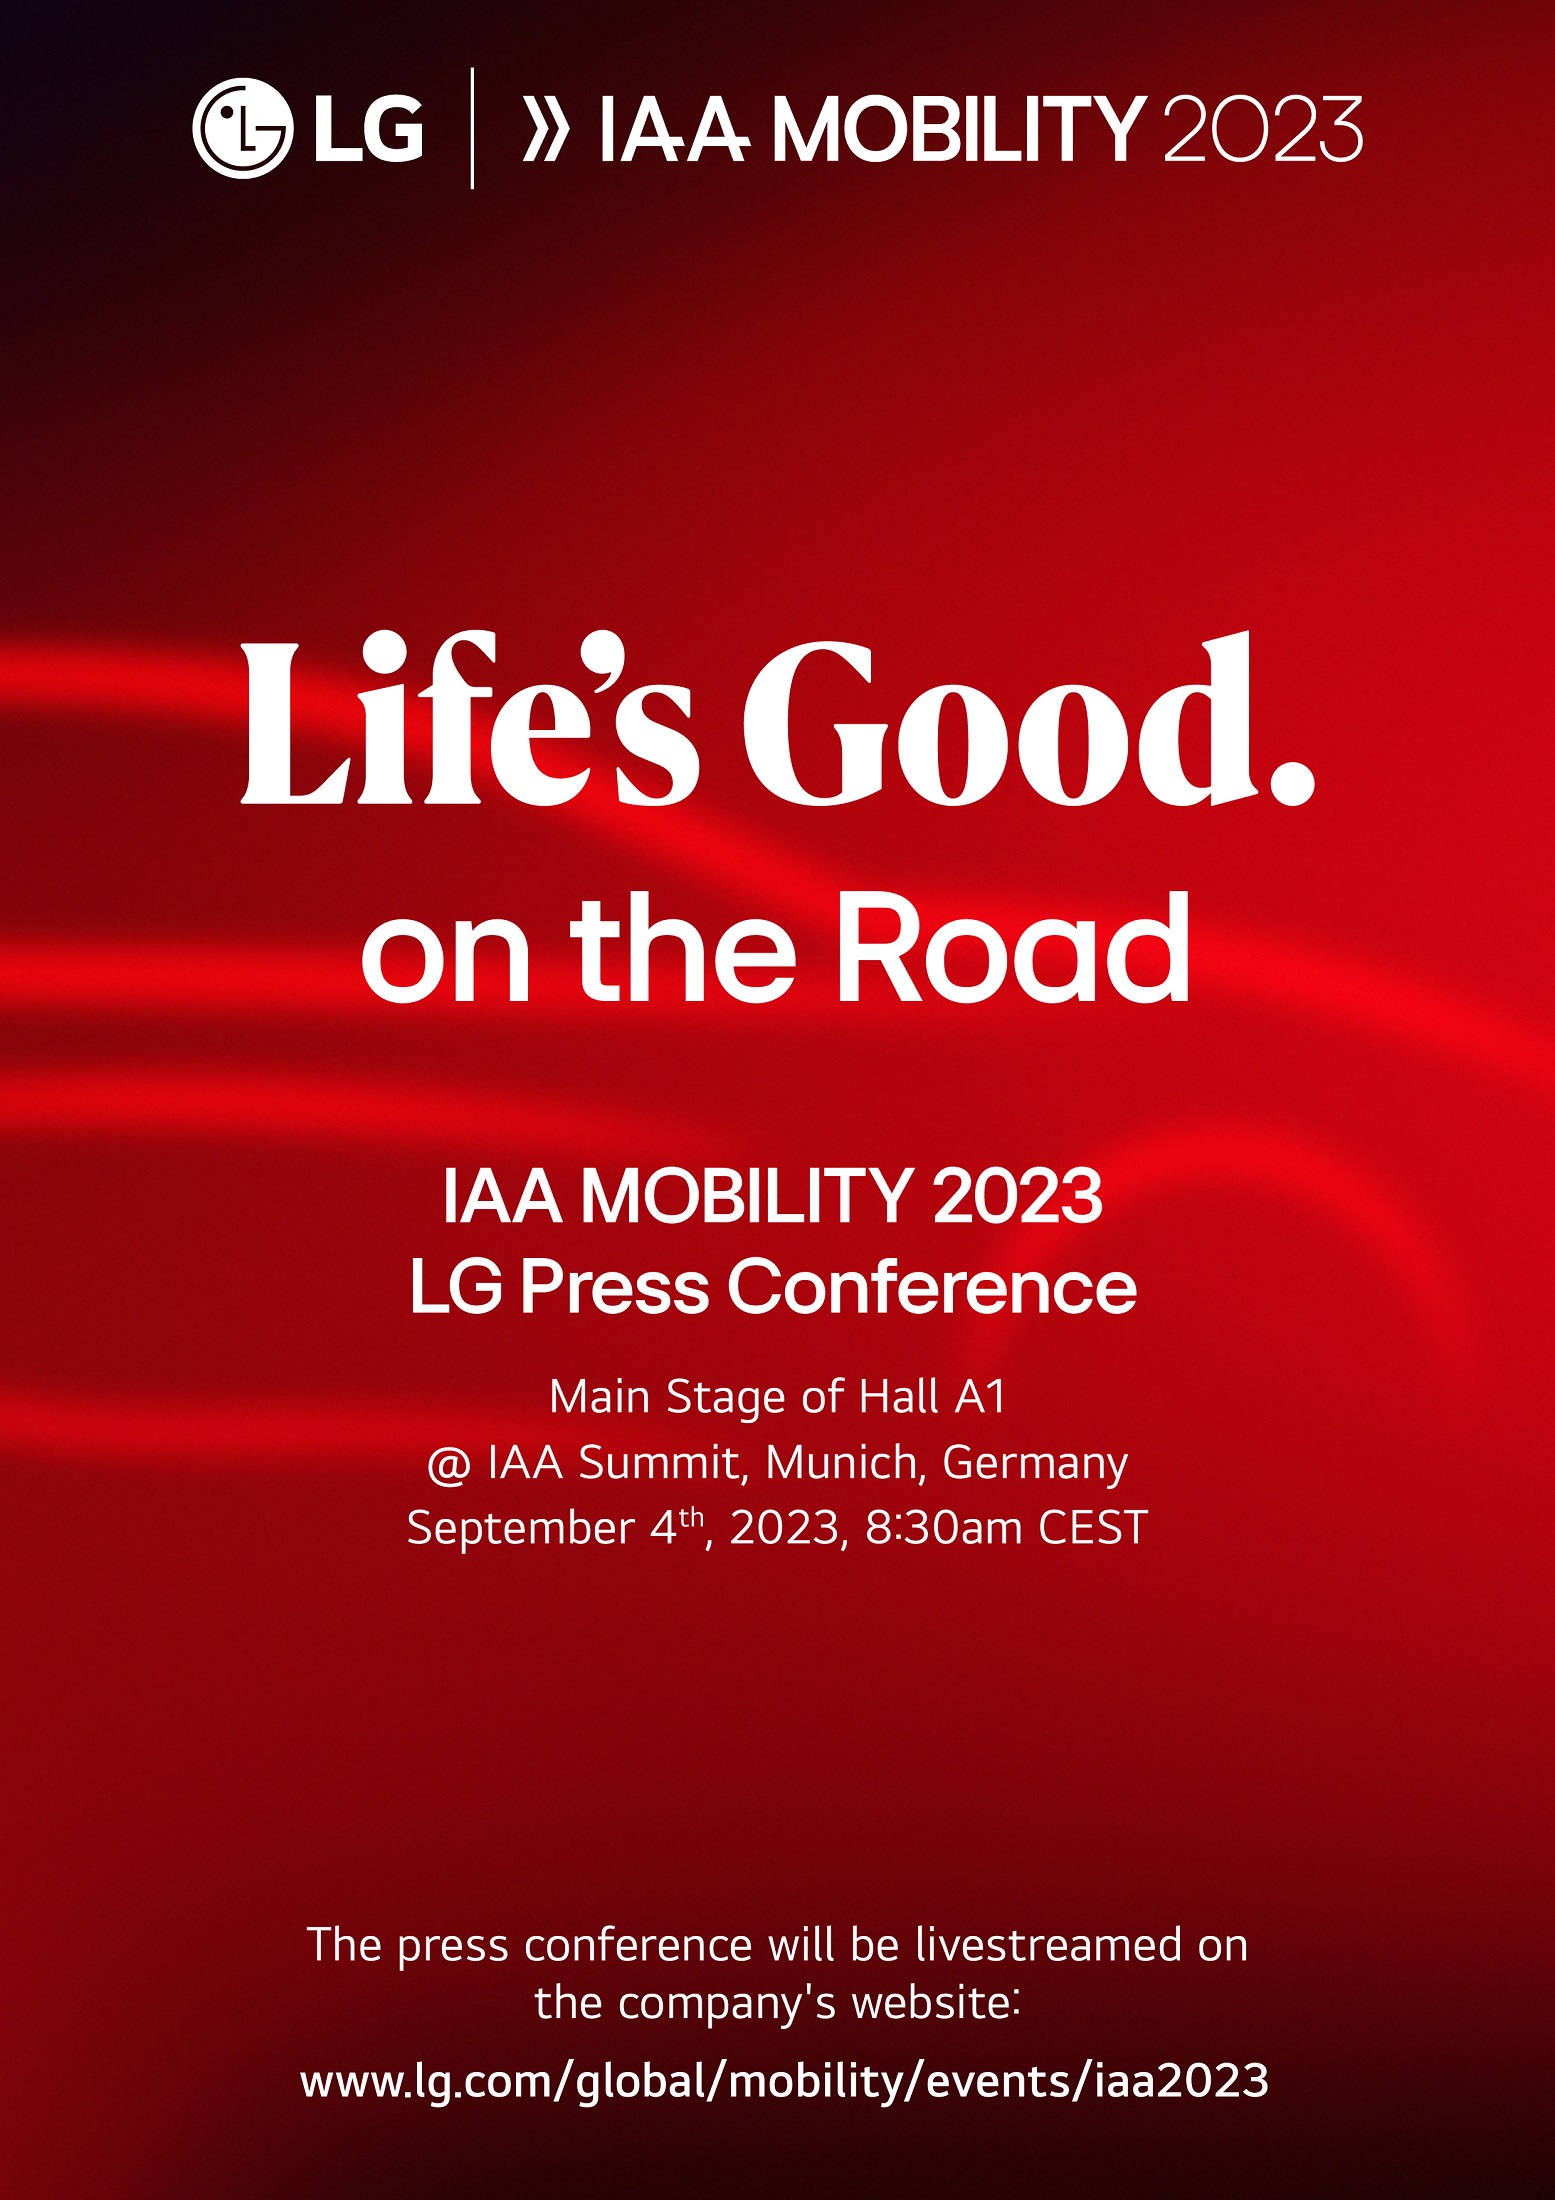 A promotional image of LG Press Conference at IAA Mobility 2023 with a phrase "Life's Good. on the road"